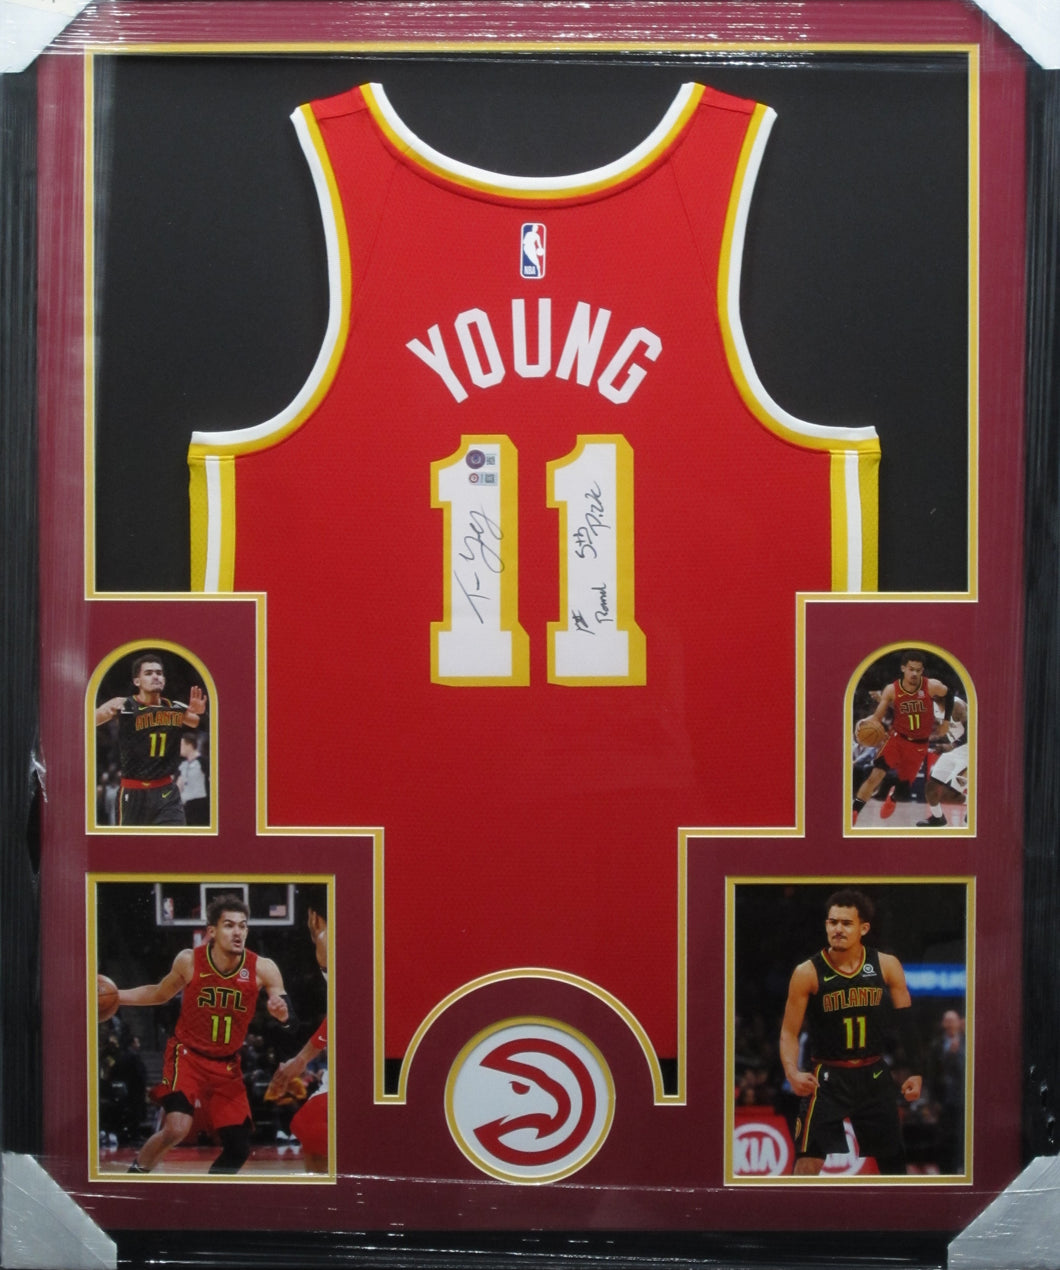 Atlanta Hawks Trae Young ROOKIE AUTOGRAPH Signed Jersey with 1st Round 5th Pick Inscription Framed & Matted with BECKETT COA & Player COA